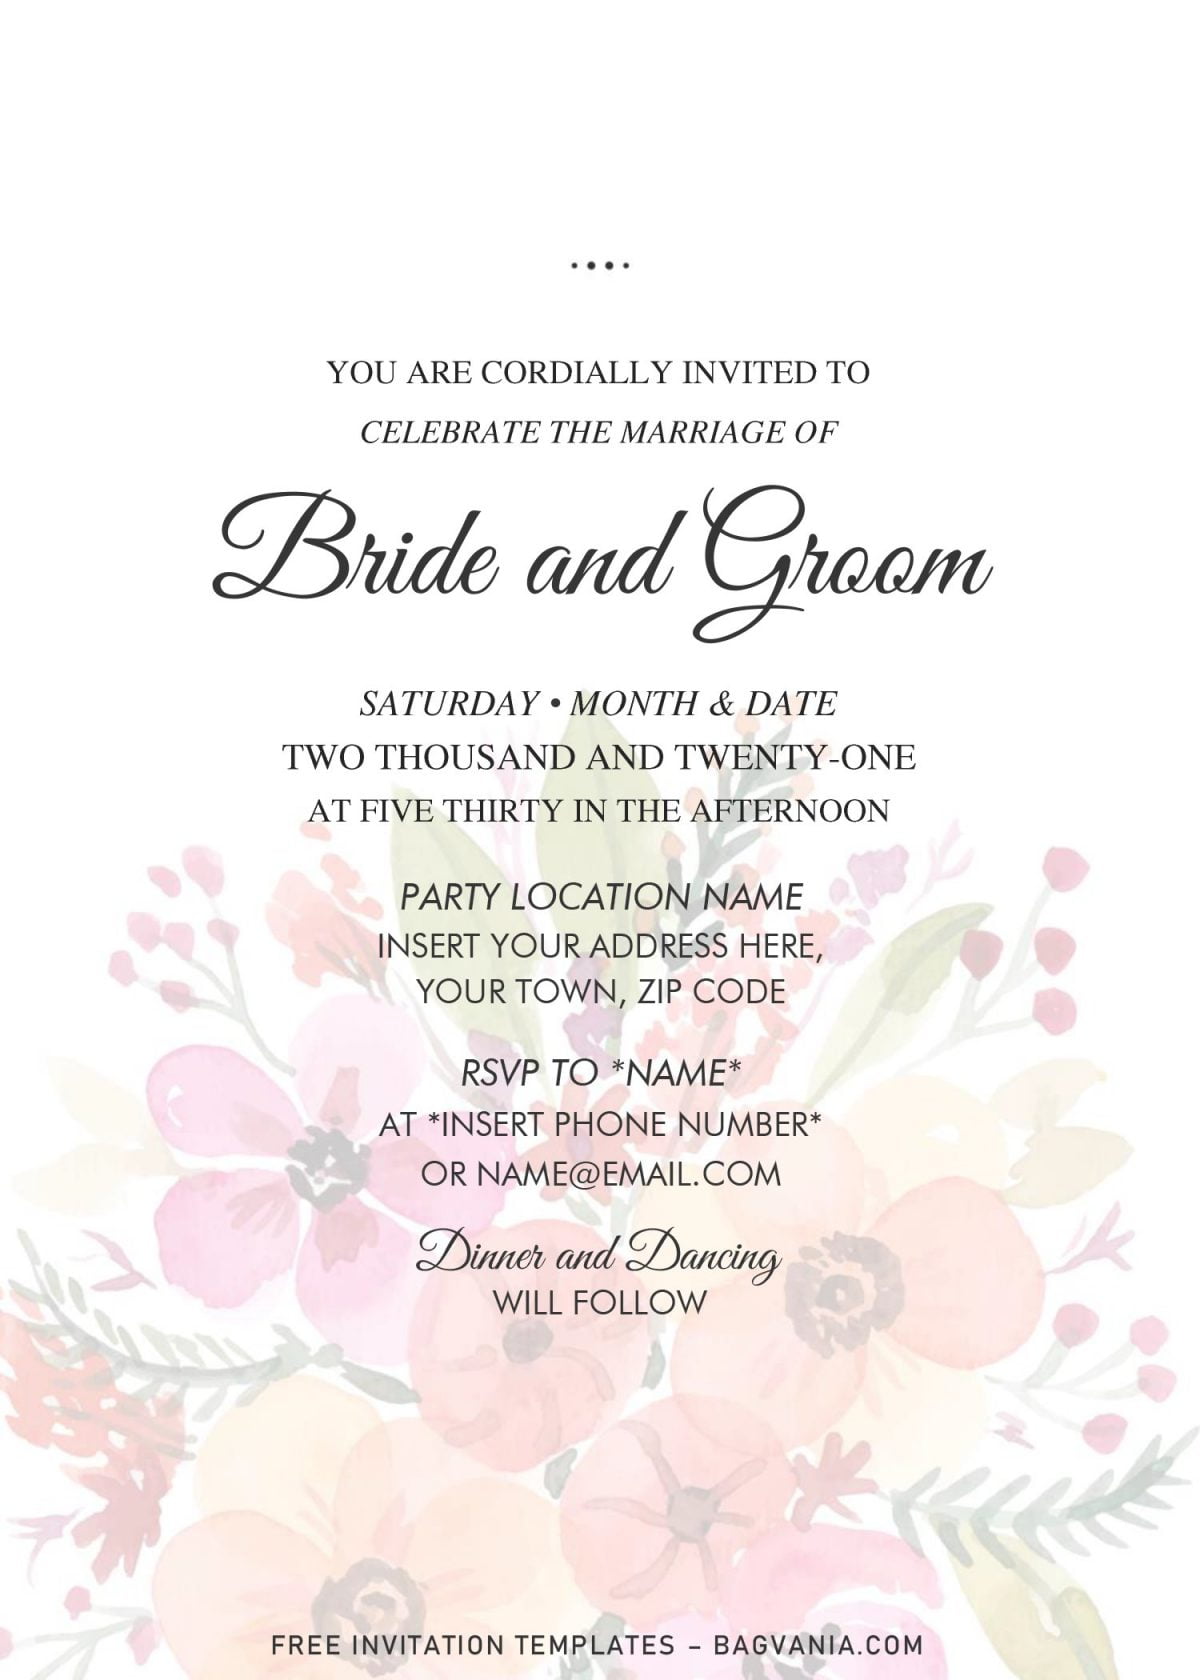 Free Vintage Floral Bouquet Baby Shower Invitation Templates For Word and has 